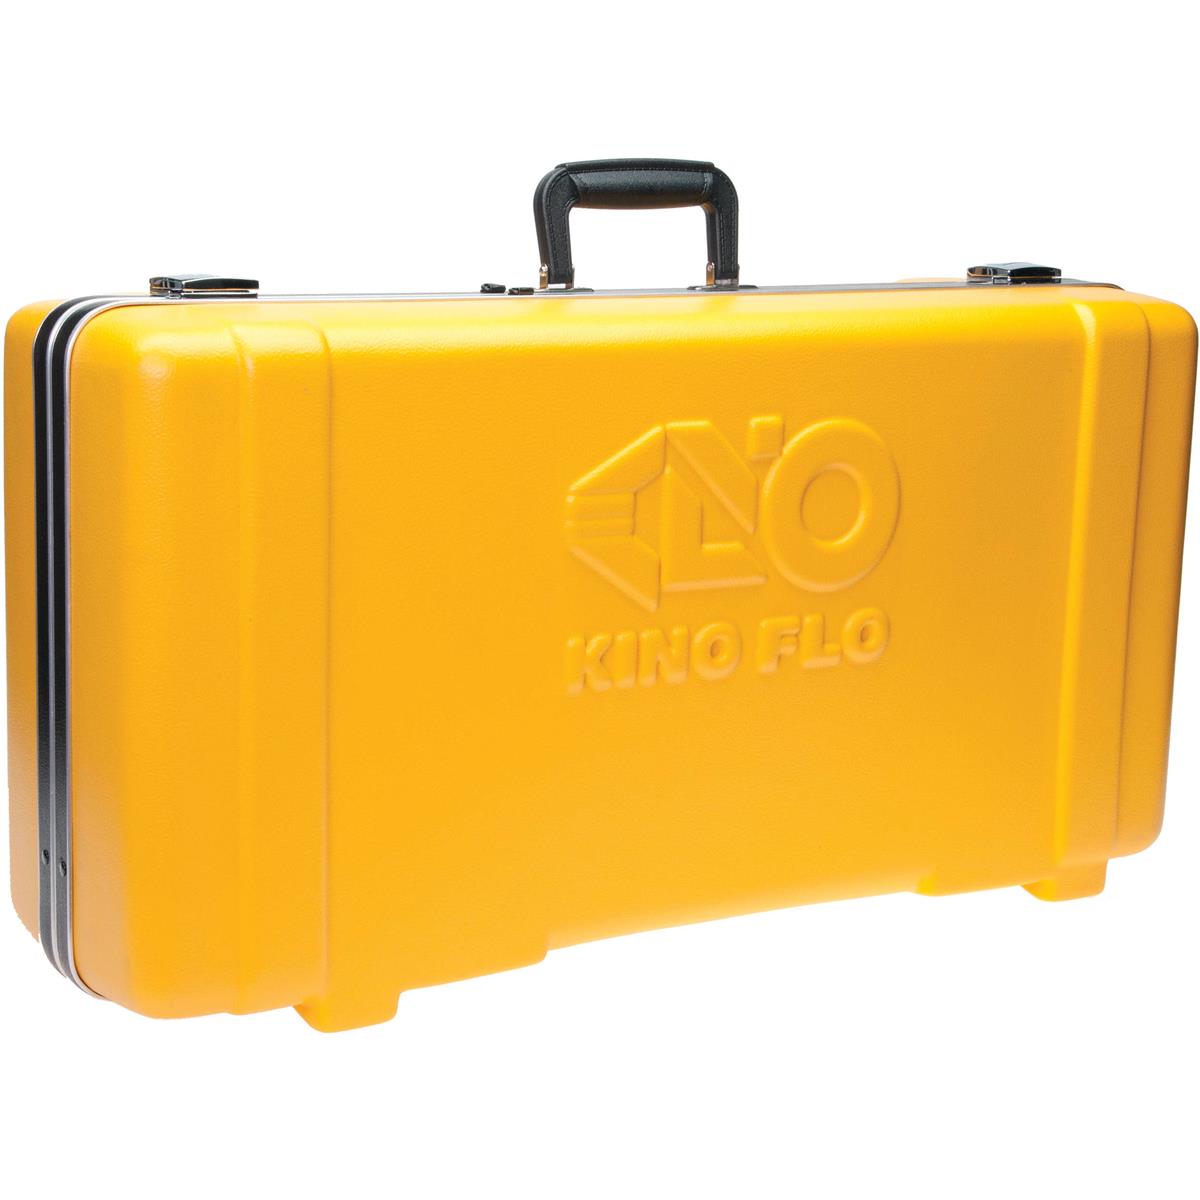 Image of Kino Flo Clamshell Travel Case for FreeStyle/GT 21 or Diva-Lite 21 LED Fixture